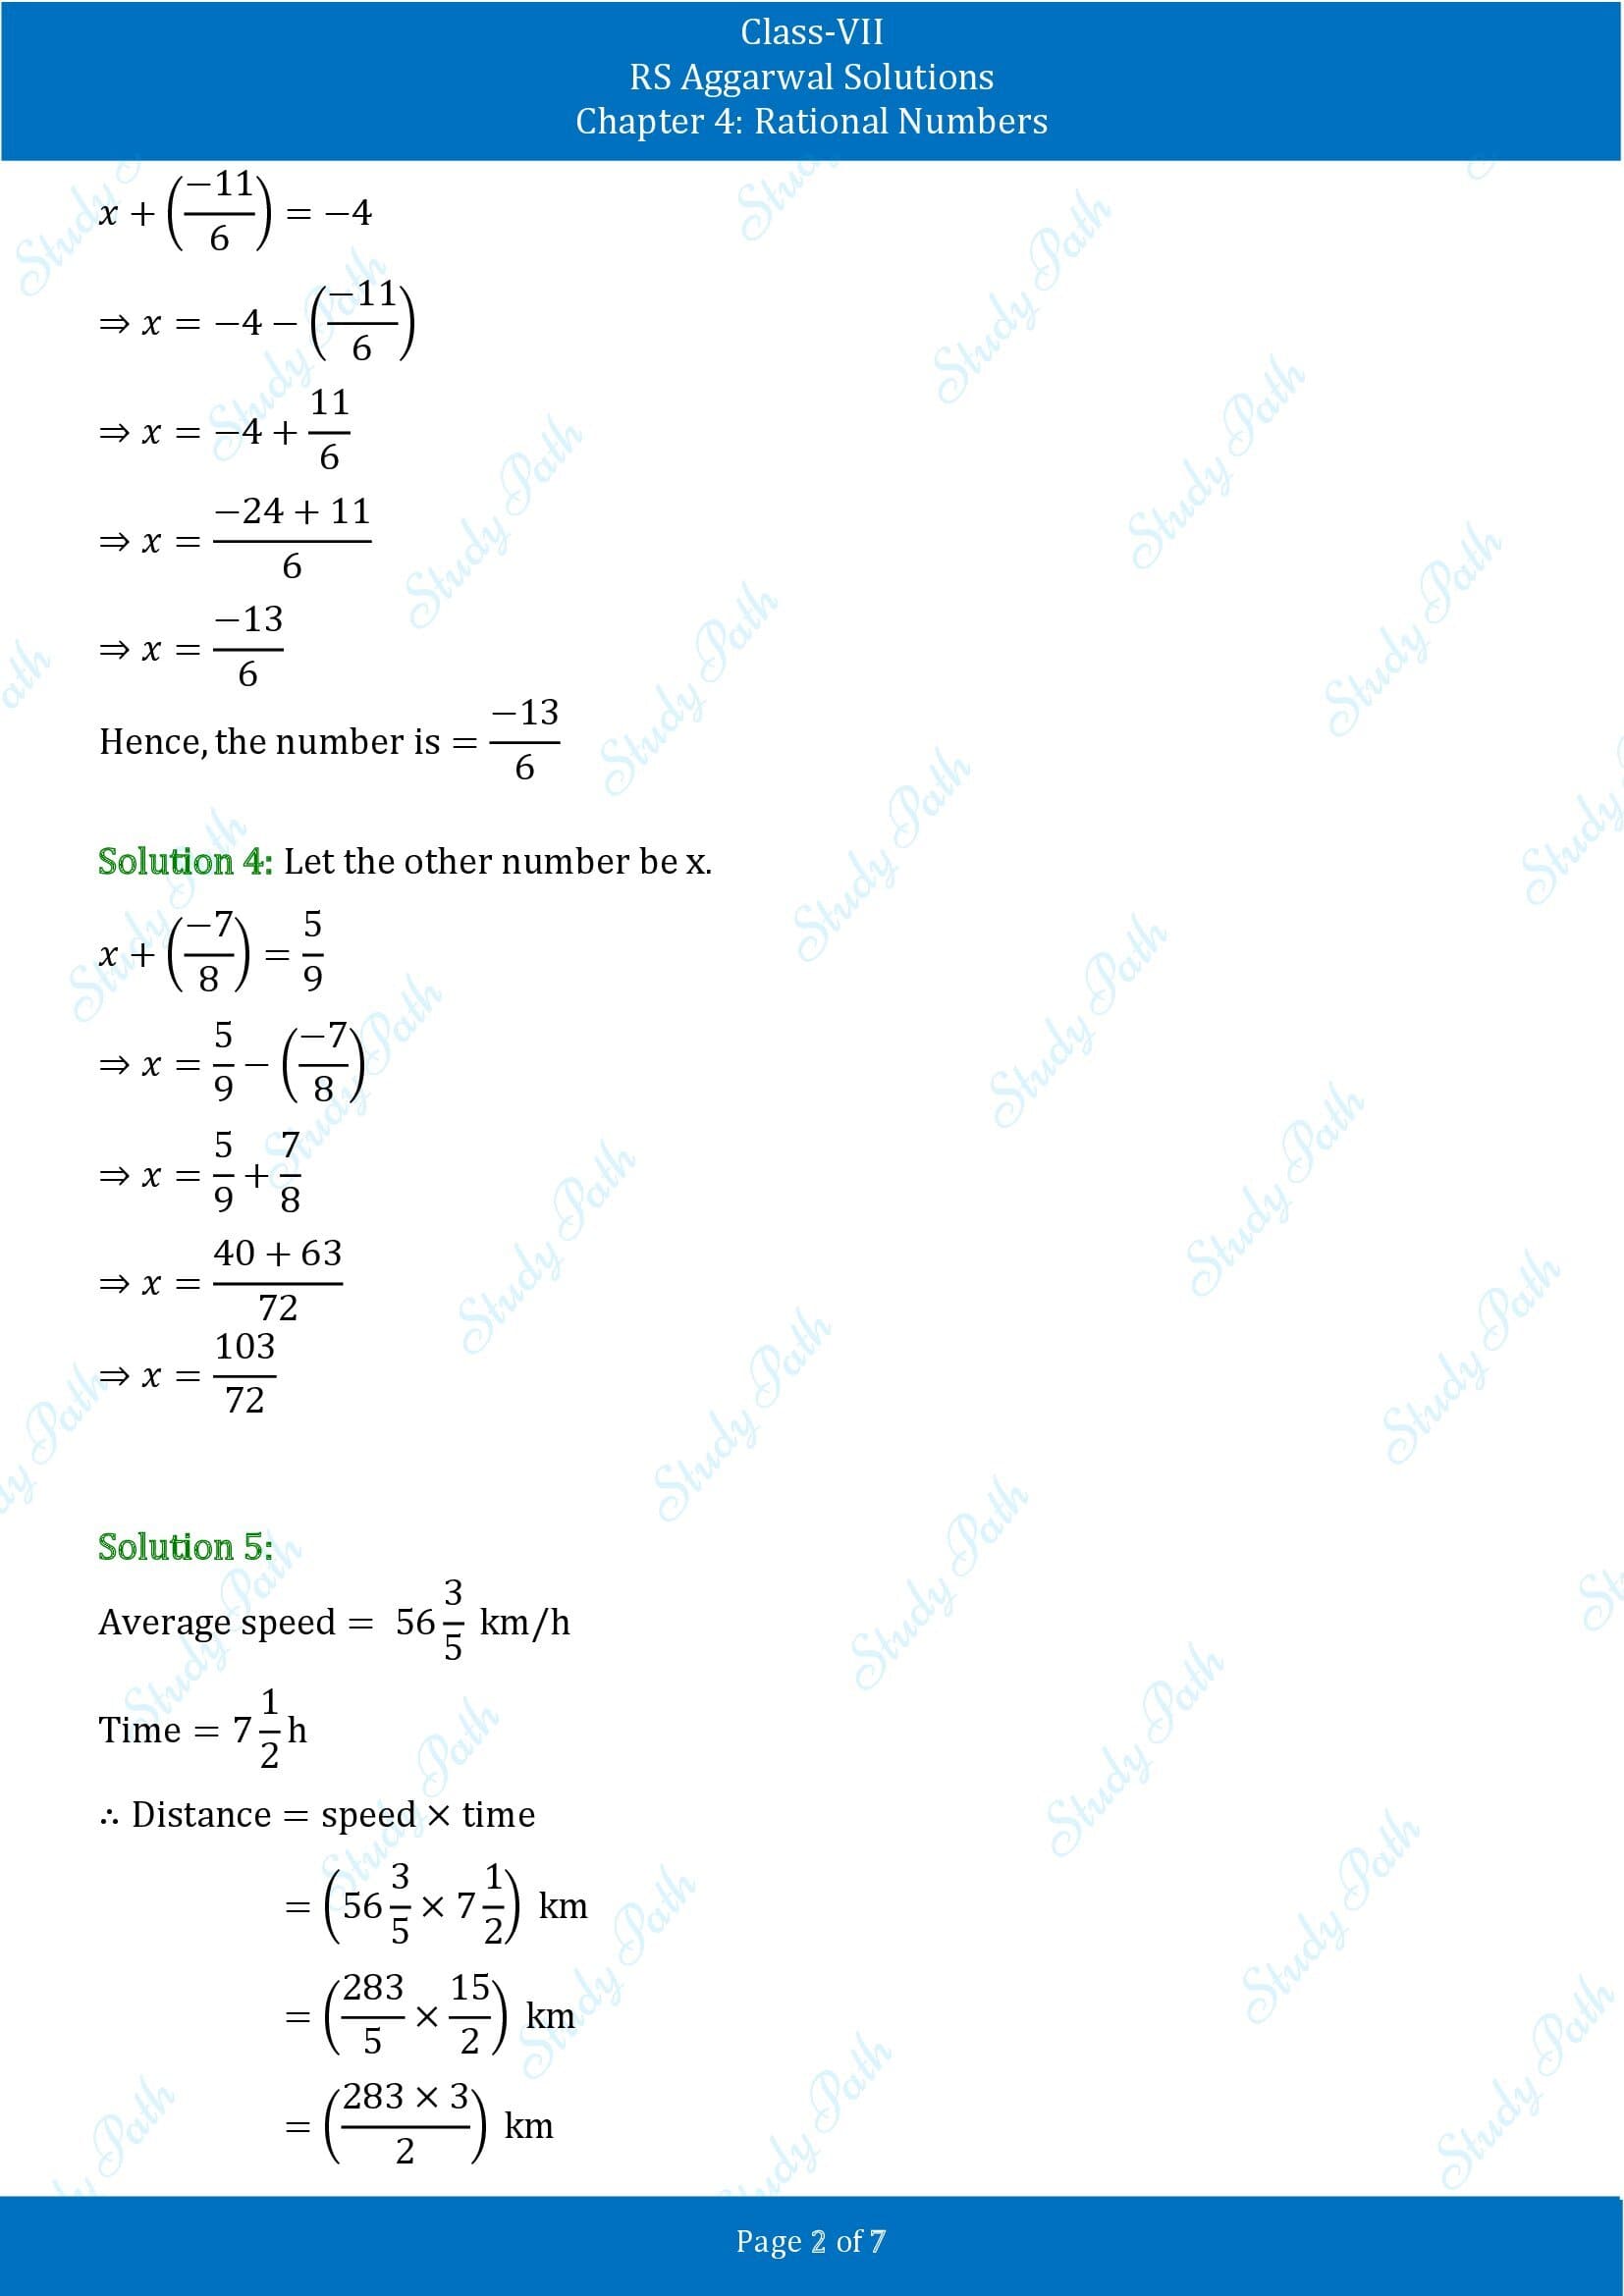 RS Aggarwal Solutions Class 7 Chapter 4 Rational Numbers Test Paper 00002